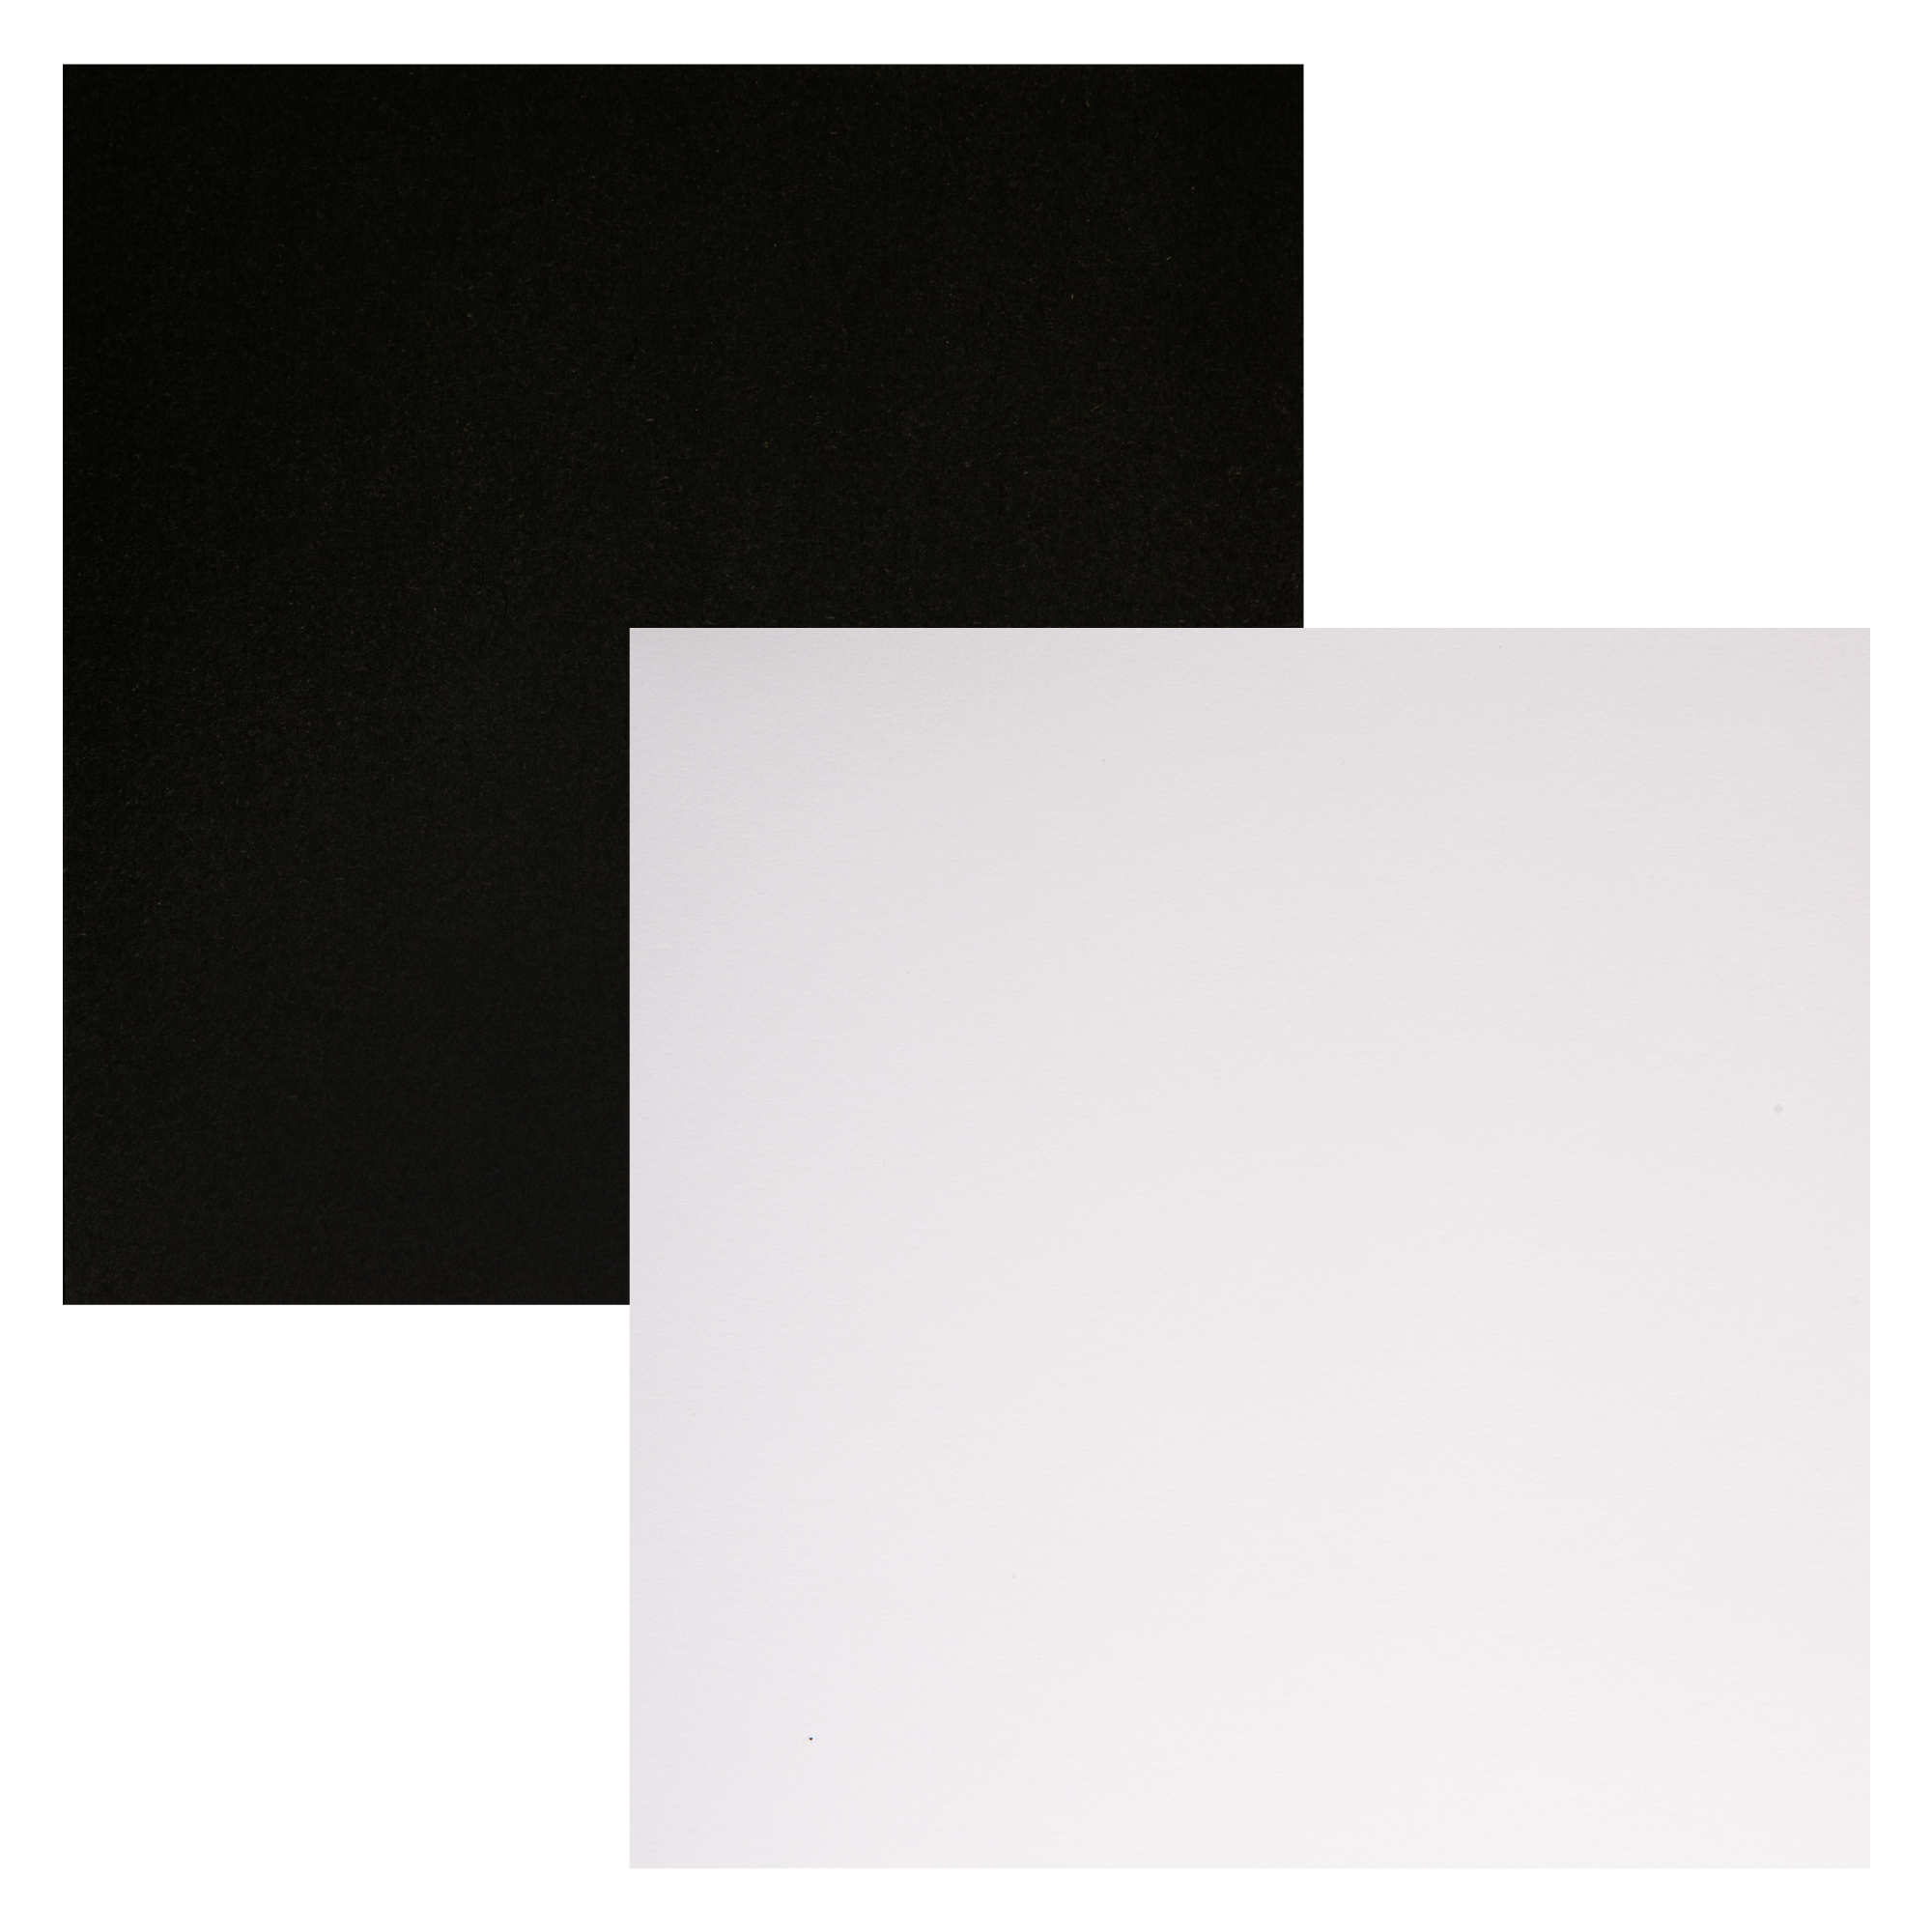 The Paper Mill Coloured Core Smooth Cardstock 180gsm 30x30cm (12 x 12) 25  Sheets Black & White 737B Shop for the latest trends and Innovators